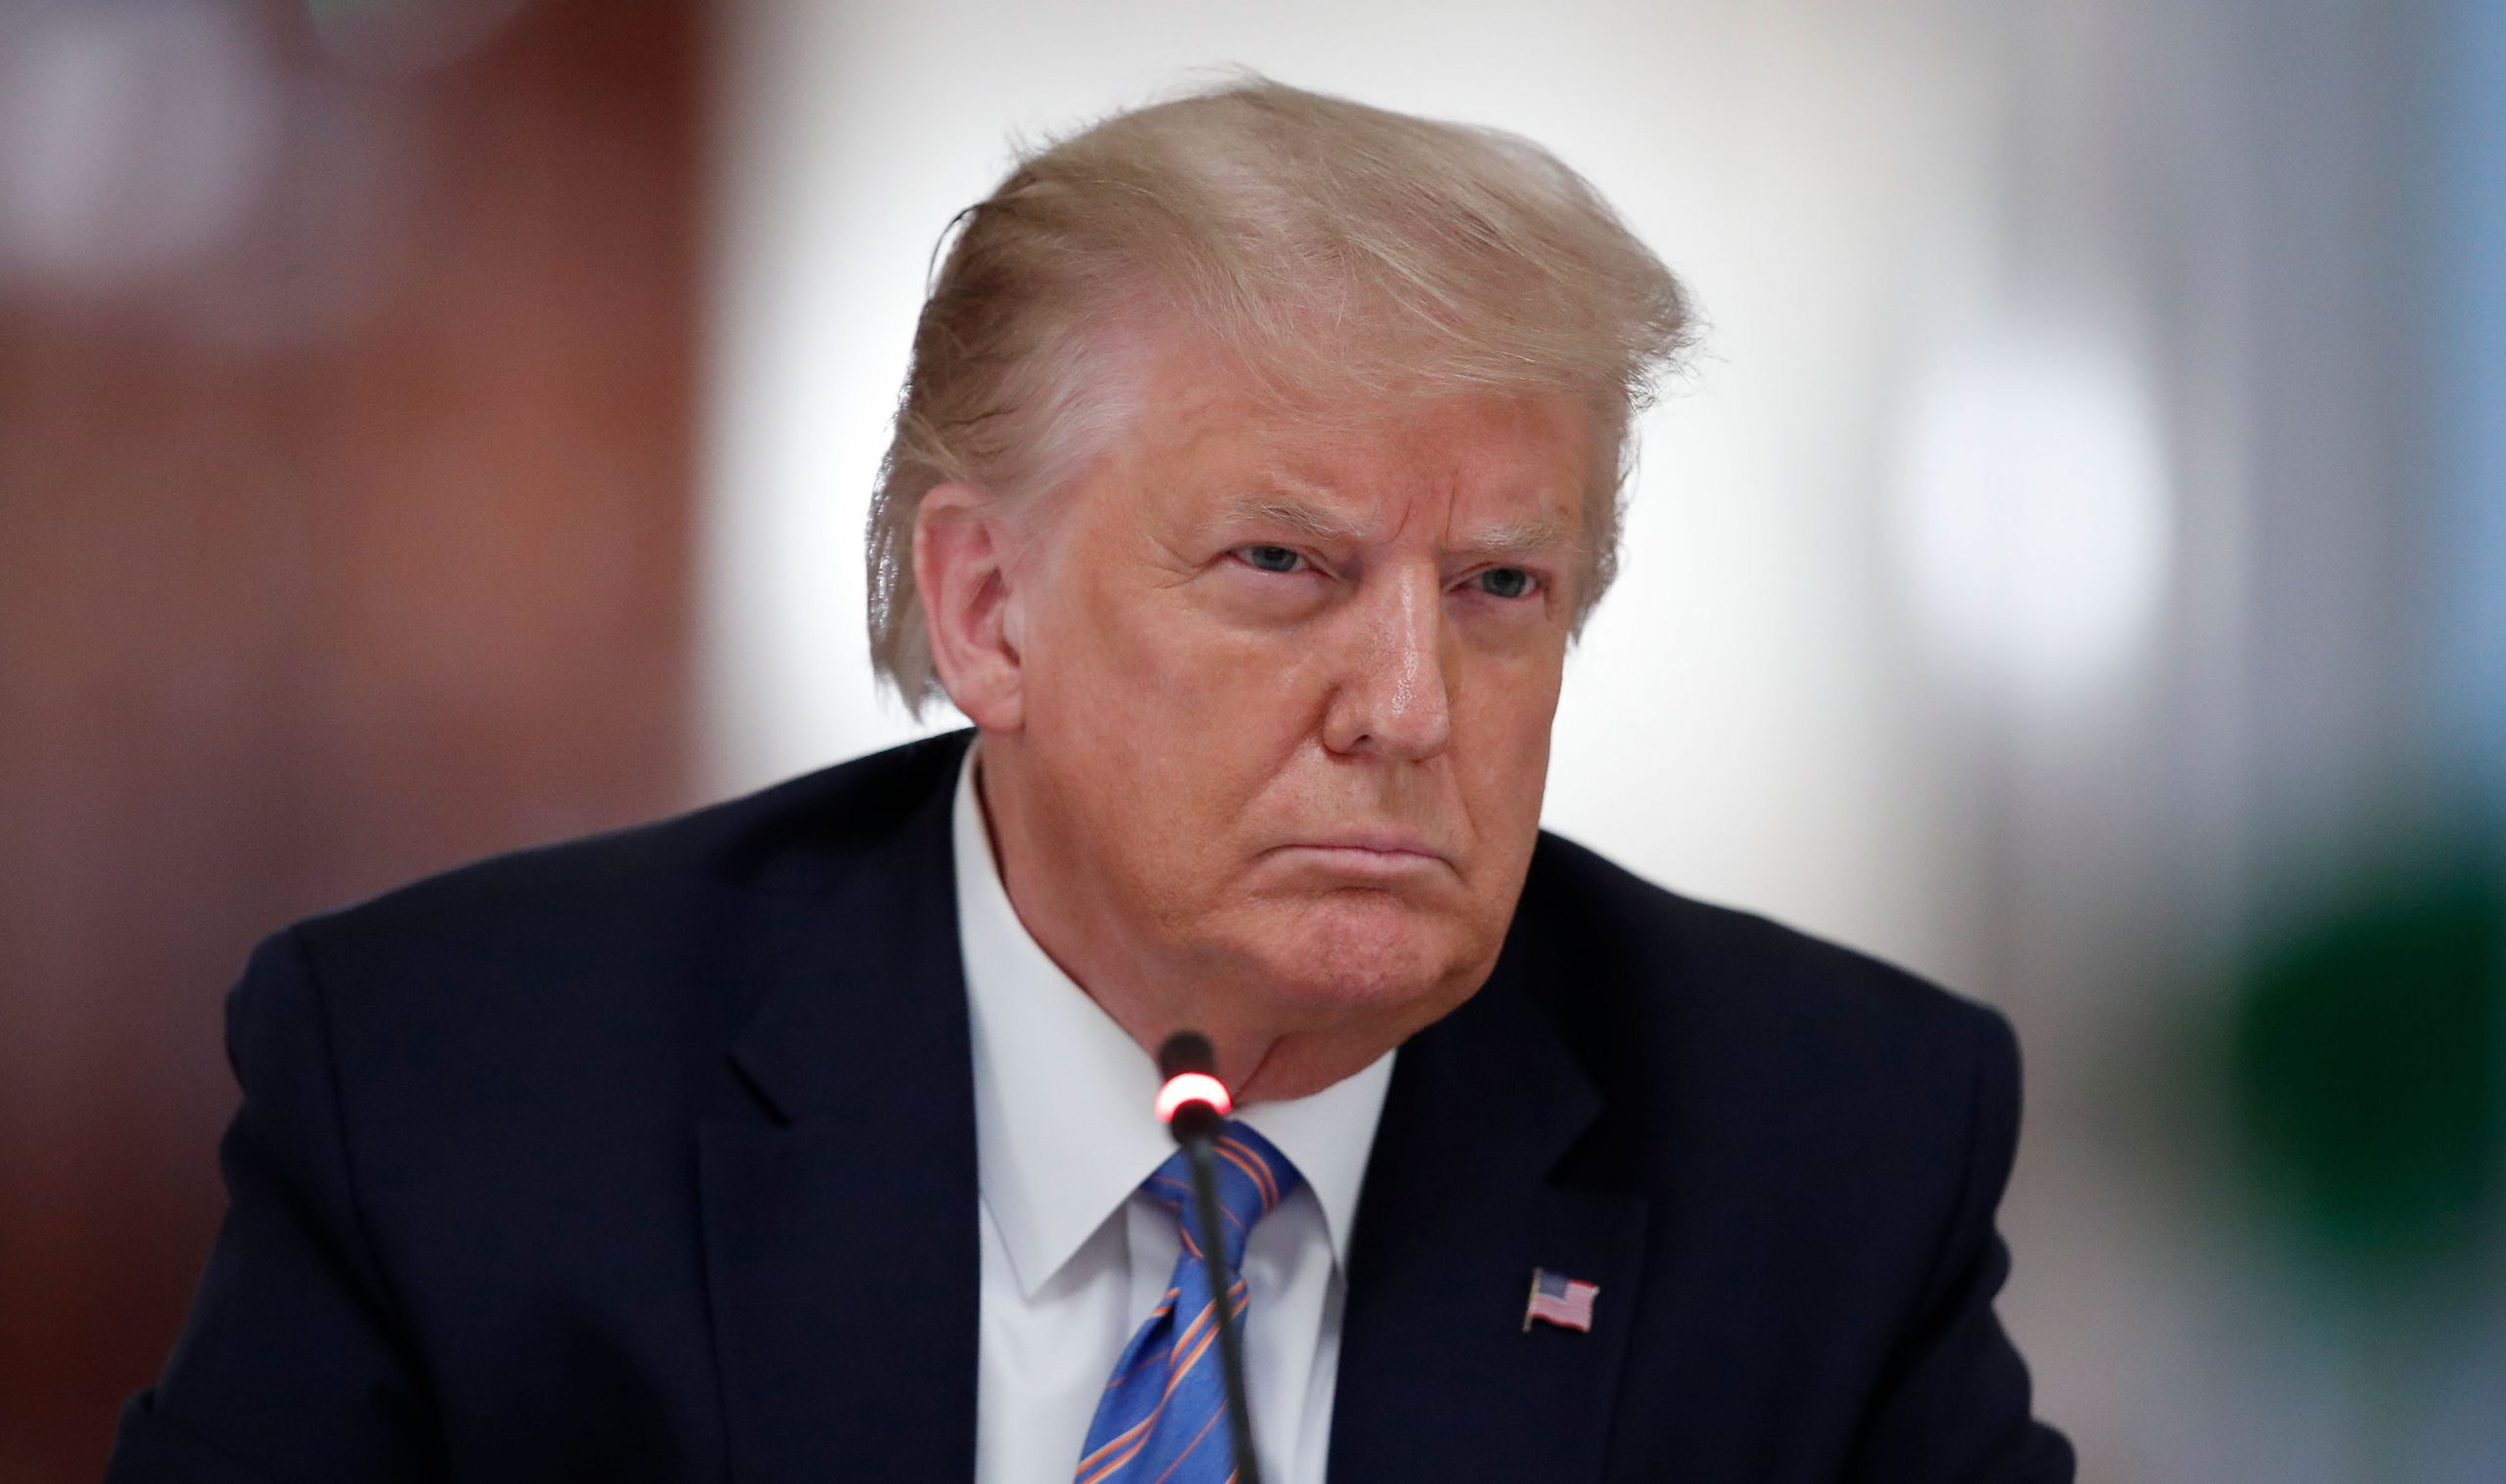 President Donald Trump listens during a "National Dialogue on Safely Reopening America's Schools," event at the White House on July 7 in Washington, DC.